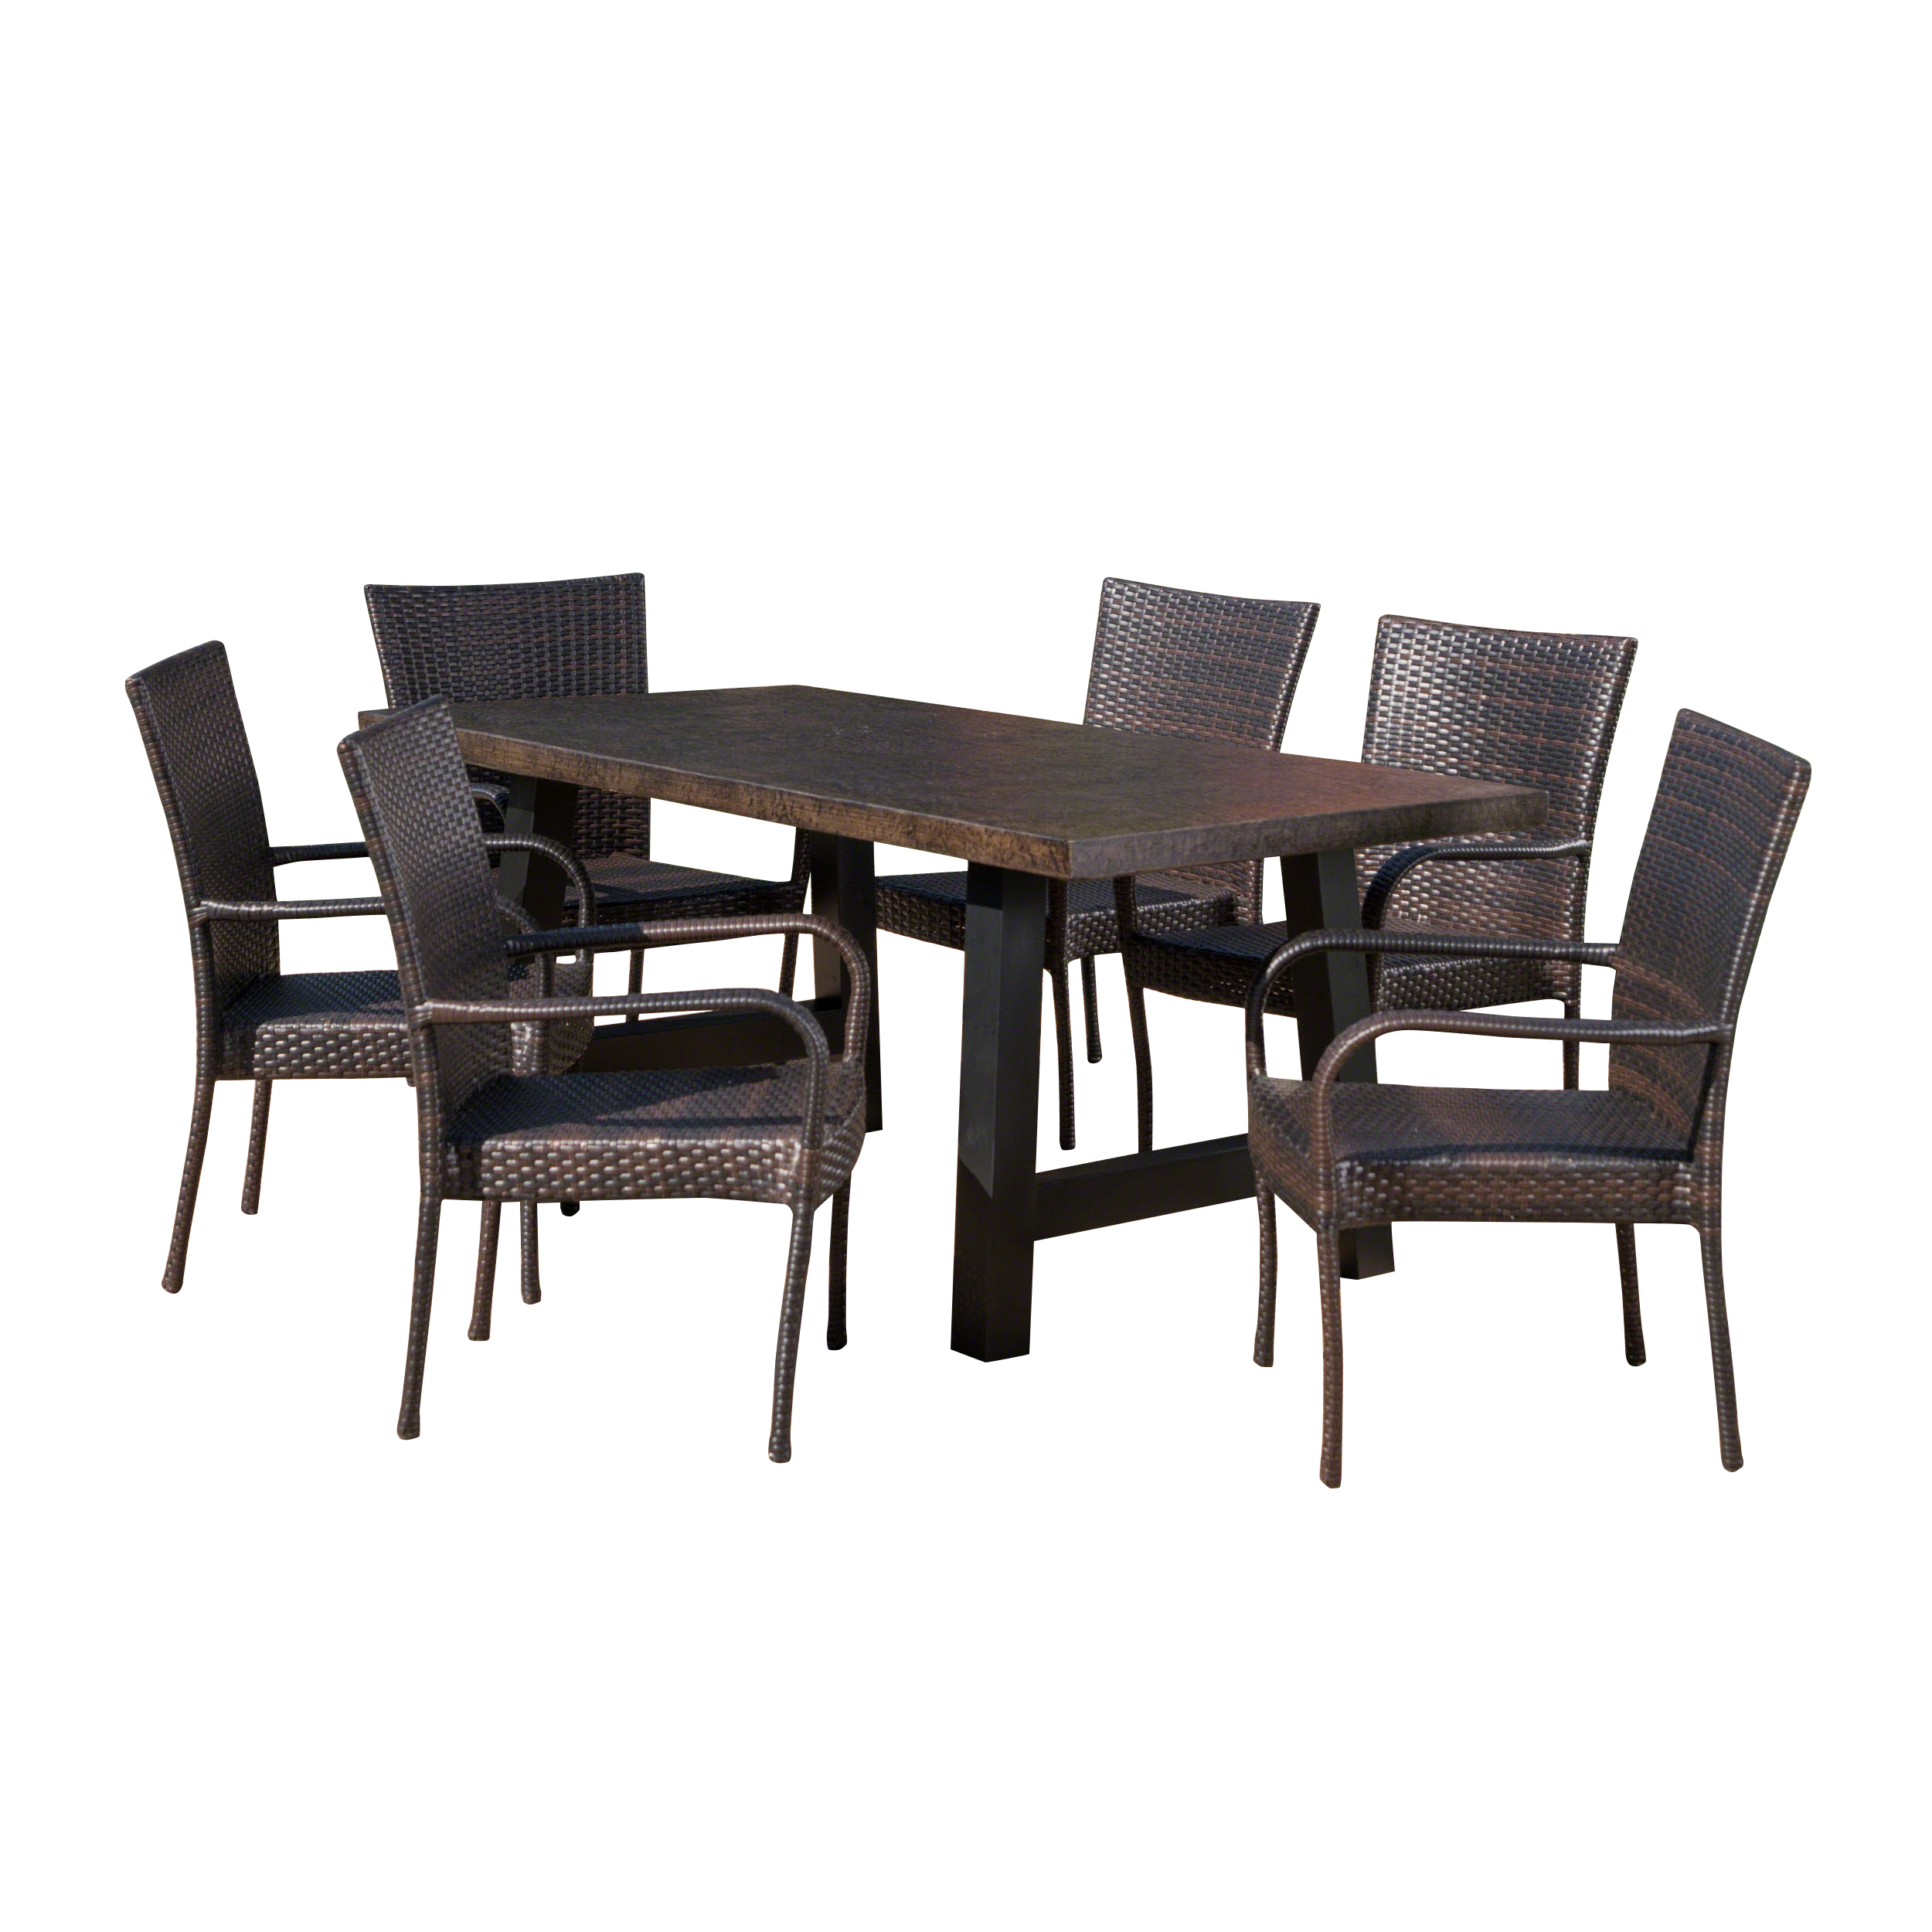 Felipe Outdoor 7 Piece Stacking Wicker and Concrete Dining Set, Brown Stone, Black, Multibrown - image 5 of 6